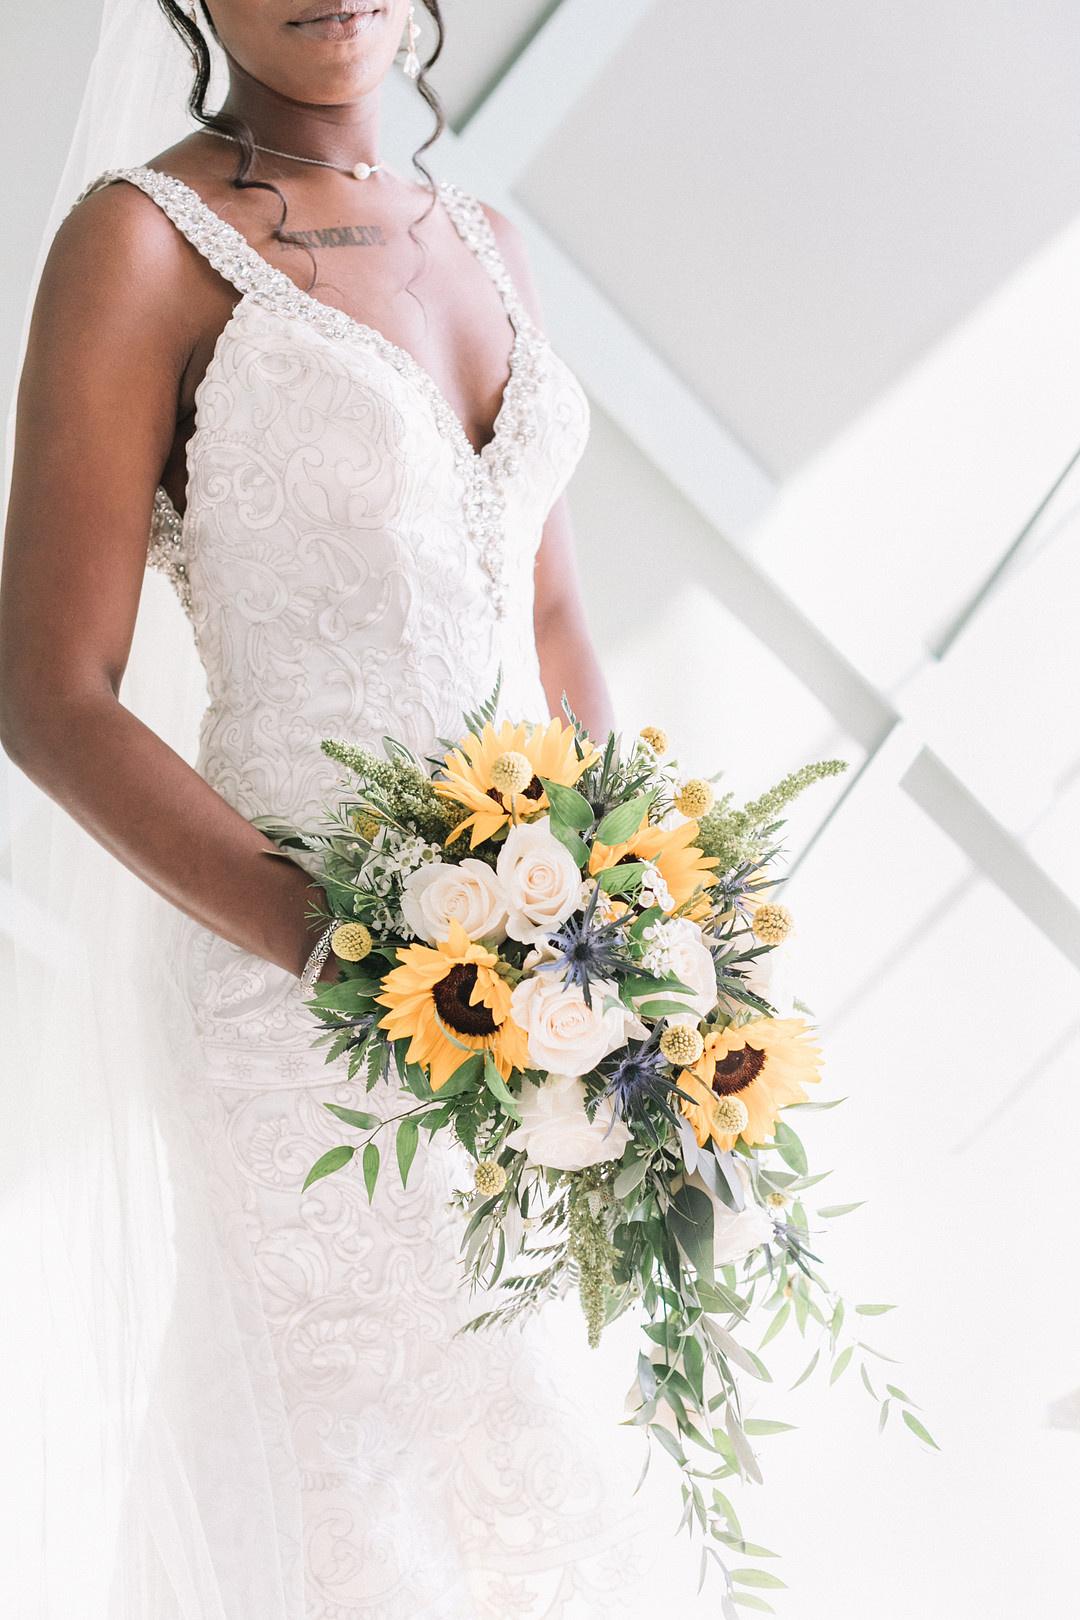 Black bride holds cascading sunflower wedding bouquet with white roses and greenery